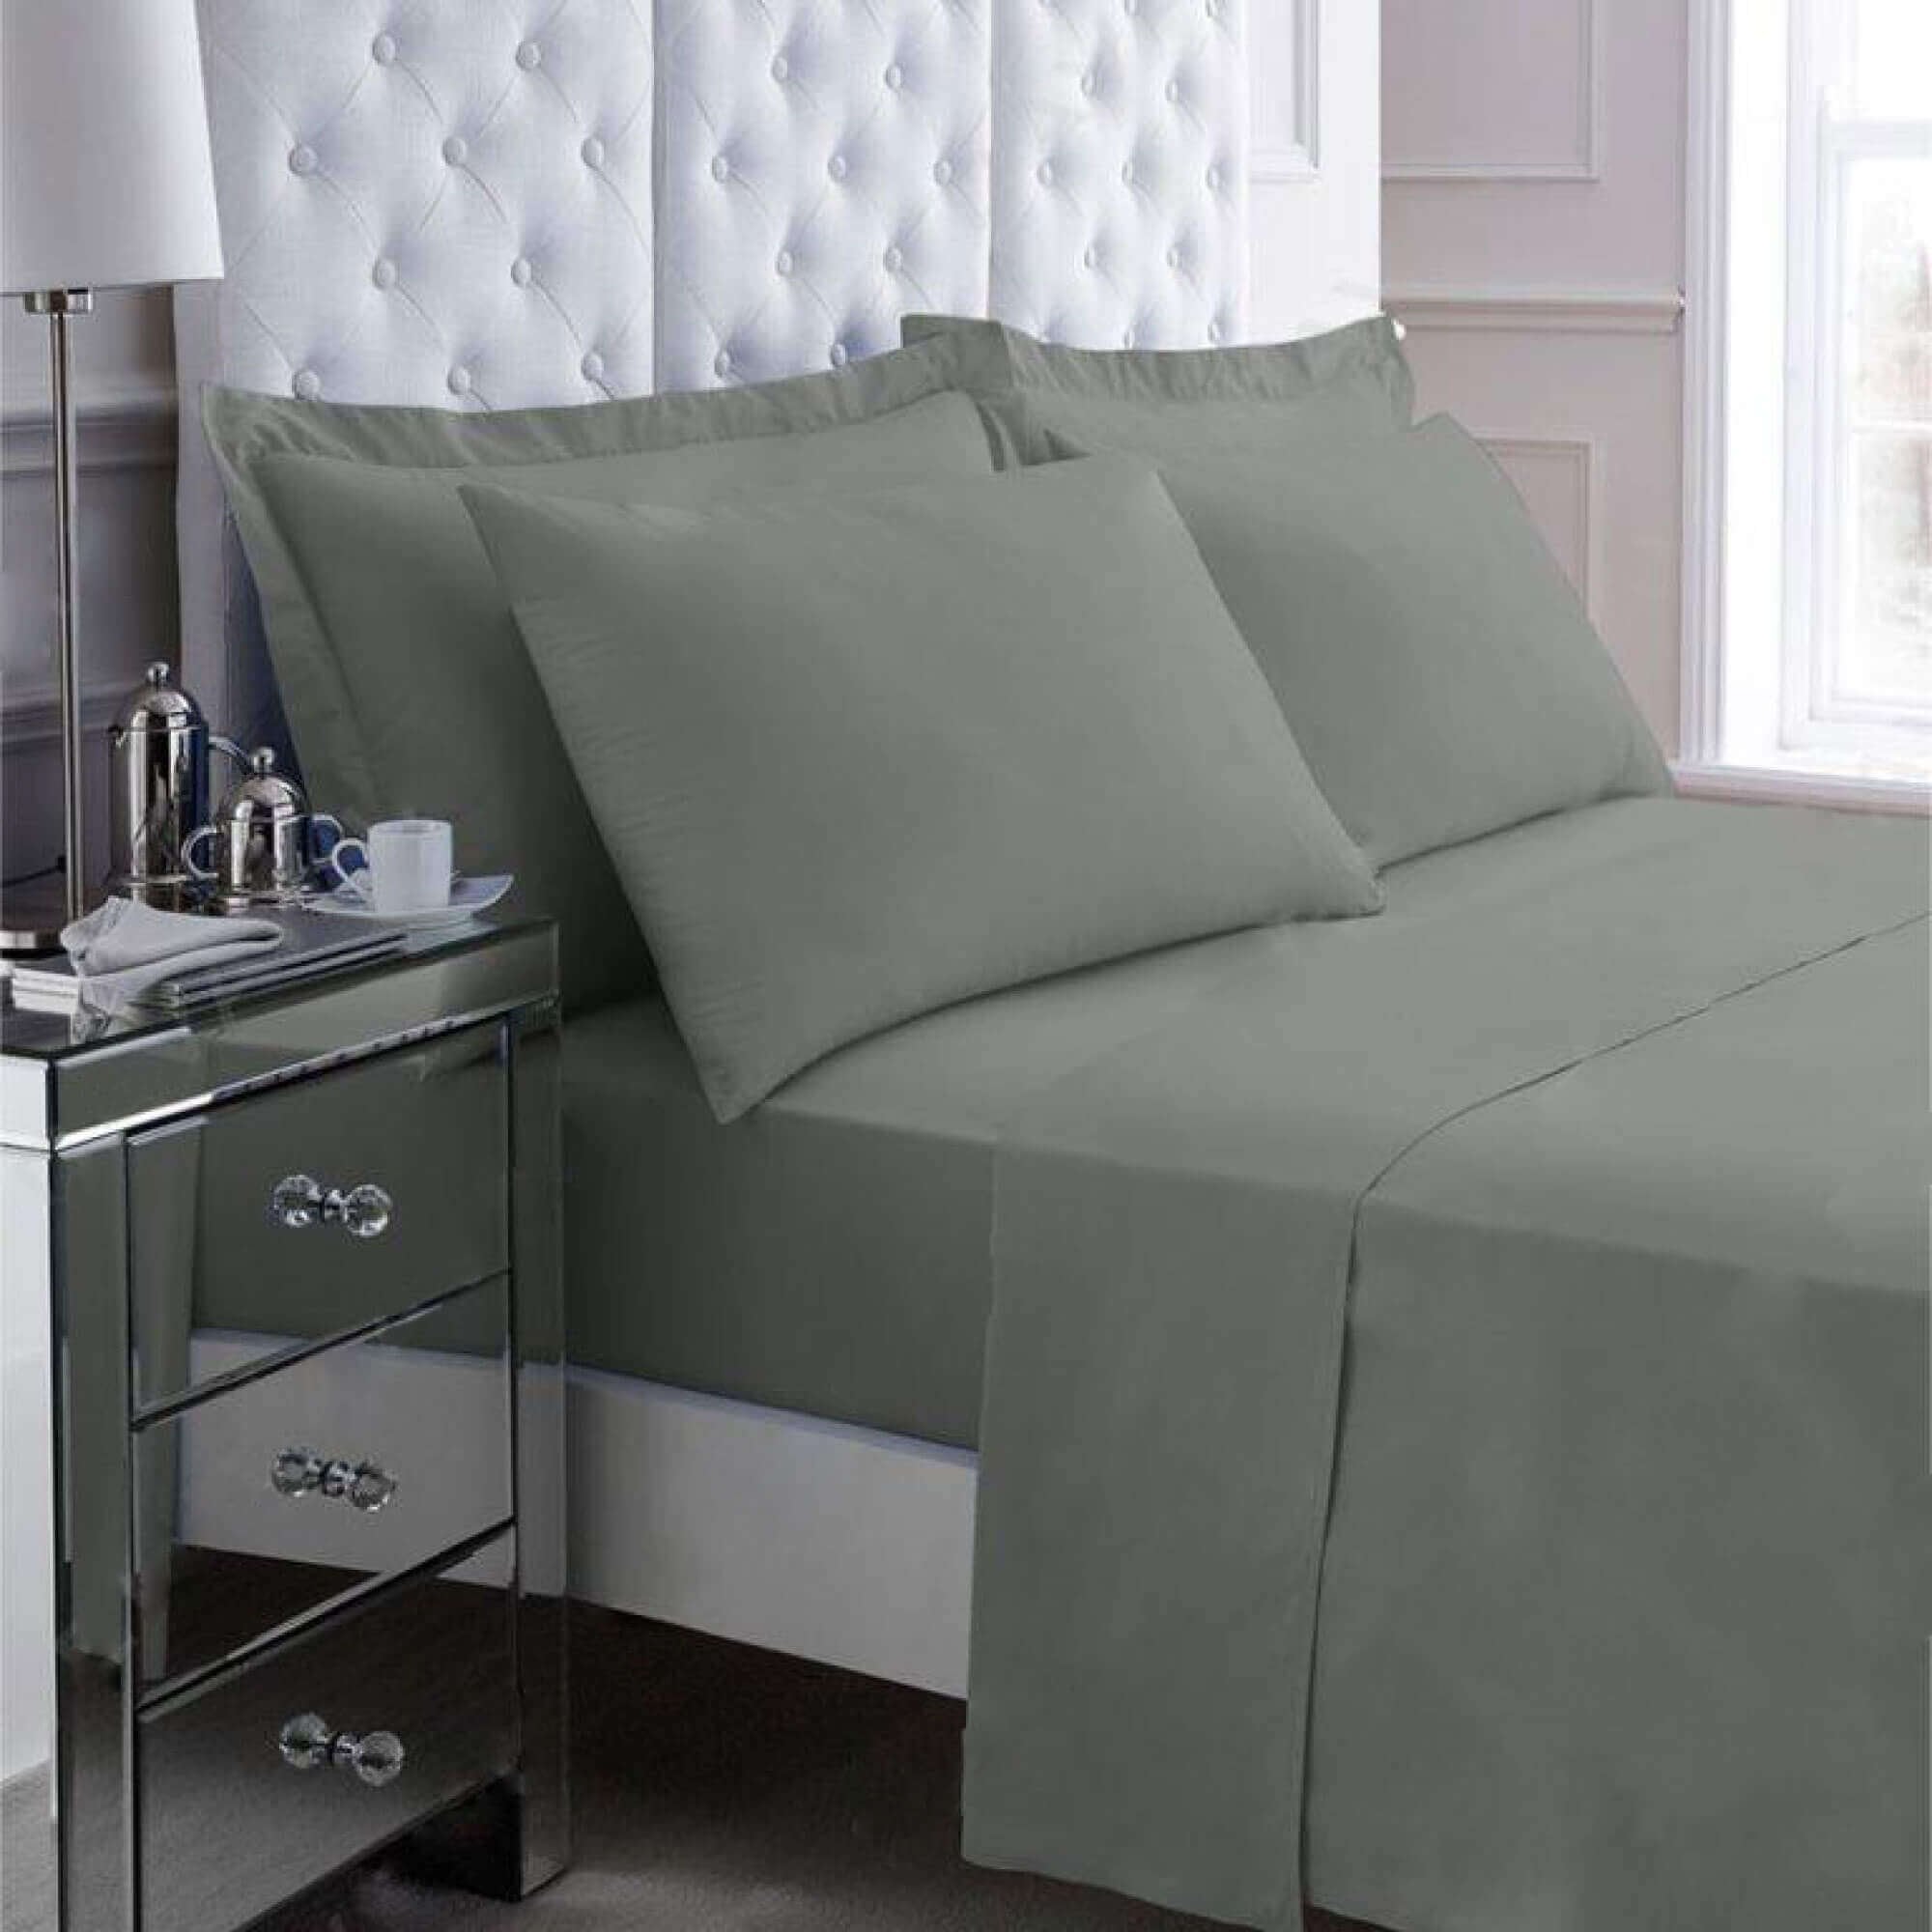 Non Iron Percale Bedding Sheet Range - Charcoal - Single Fitted - TJ Hughes